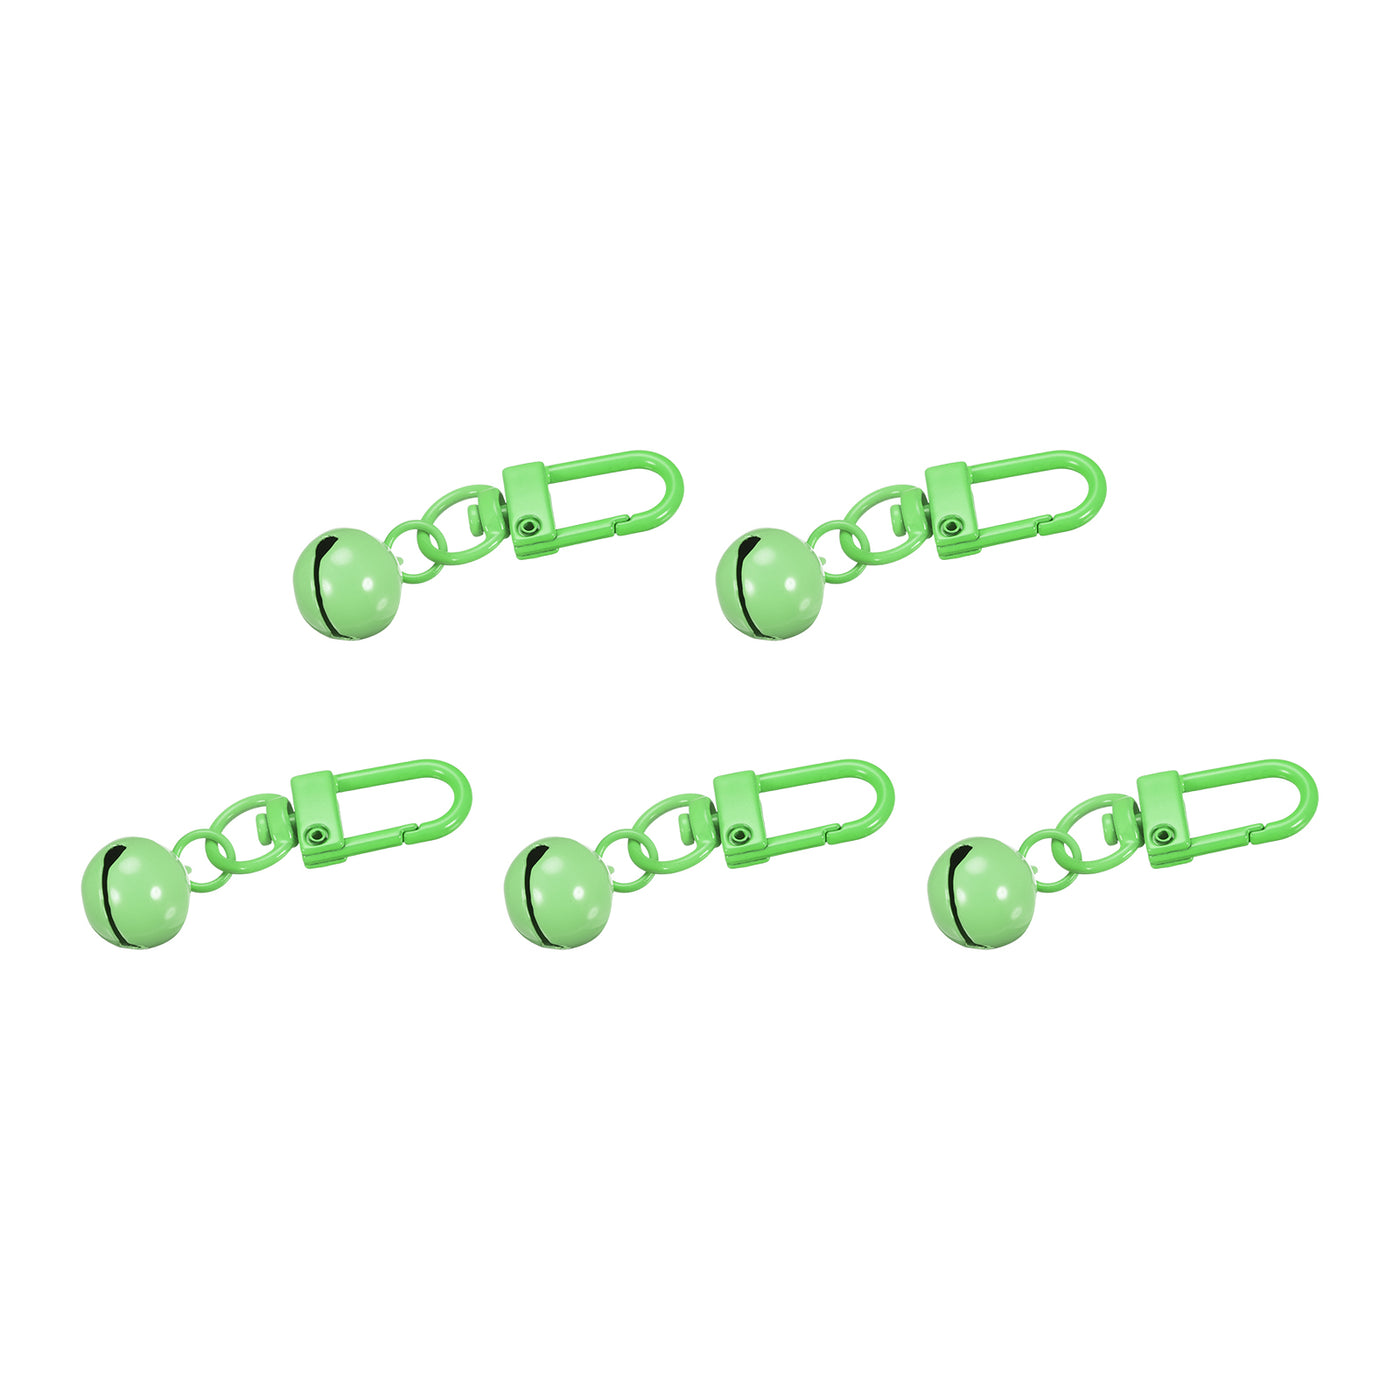 uxcell Uxcell 5Pcs Pet Bells, 13mm/0.51" Dia Green Bells with Clasps for DIY Crafts